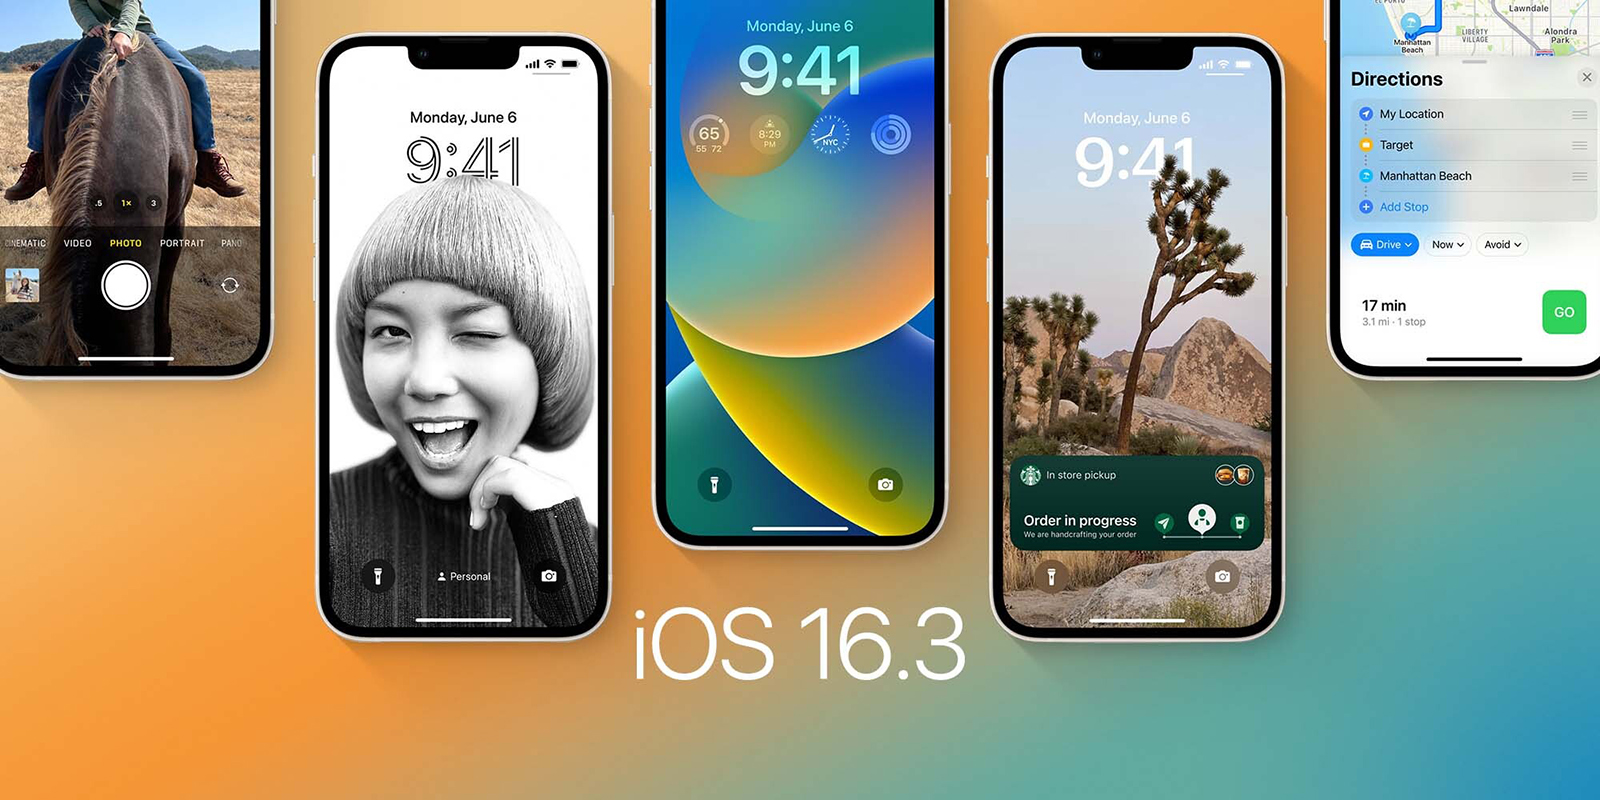 5 screen shots showing iOS 16.3 features